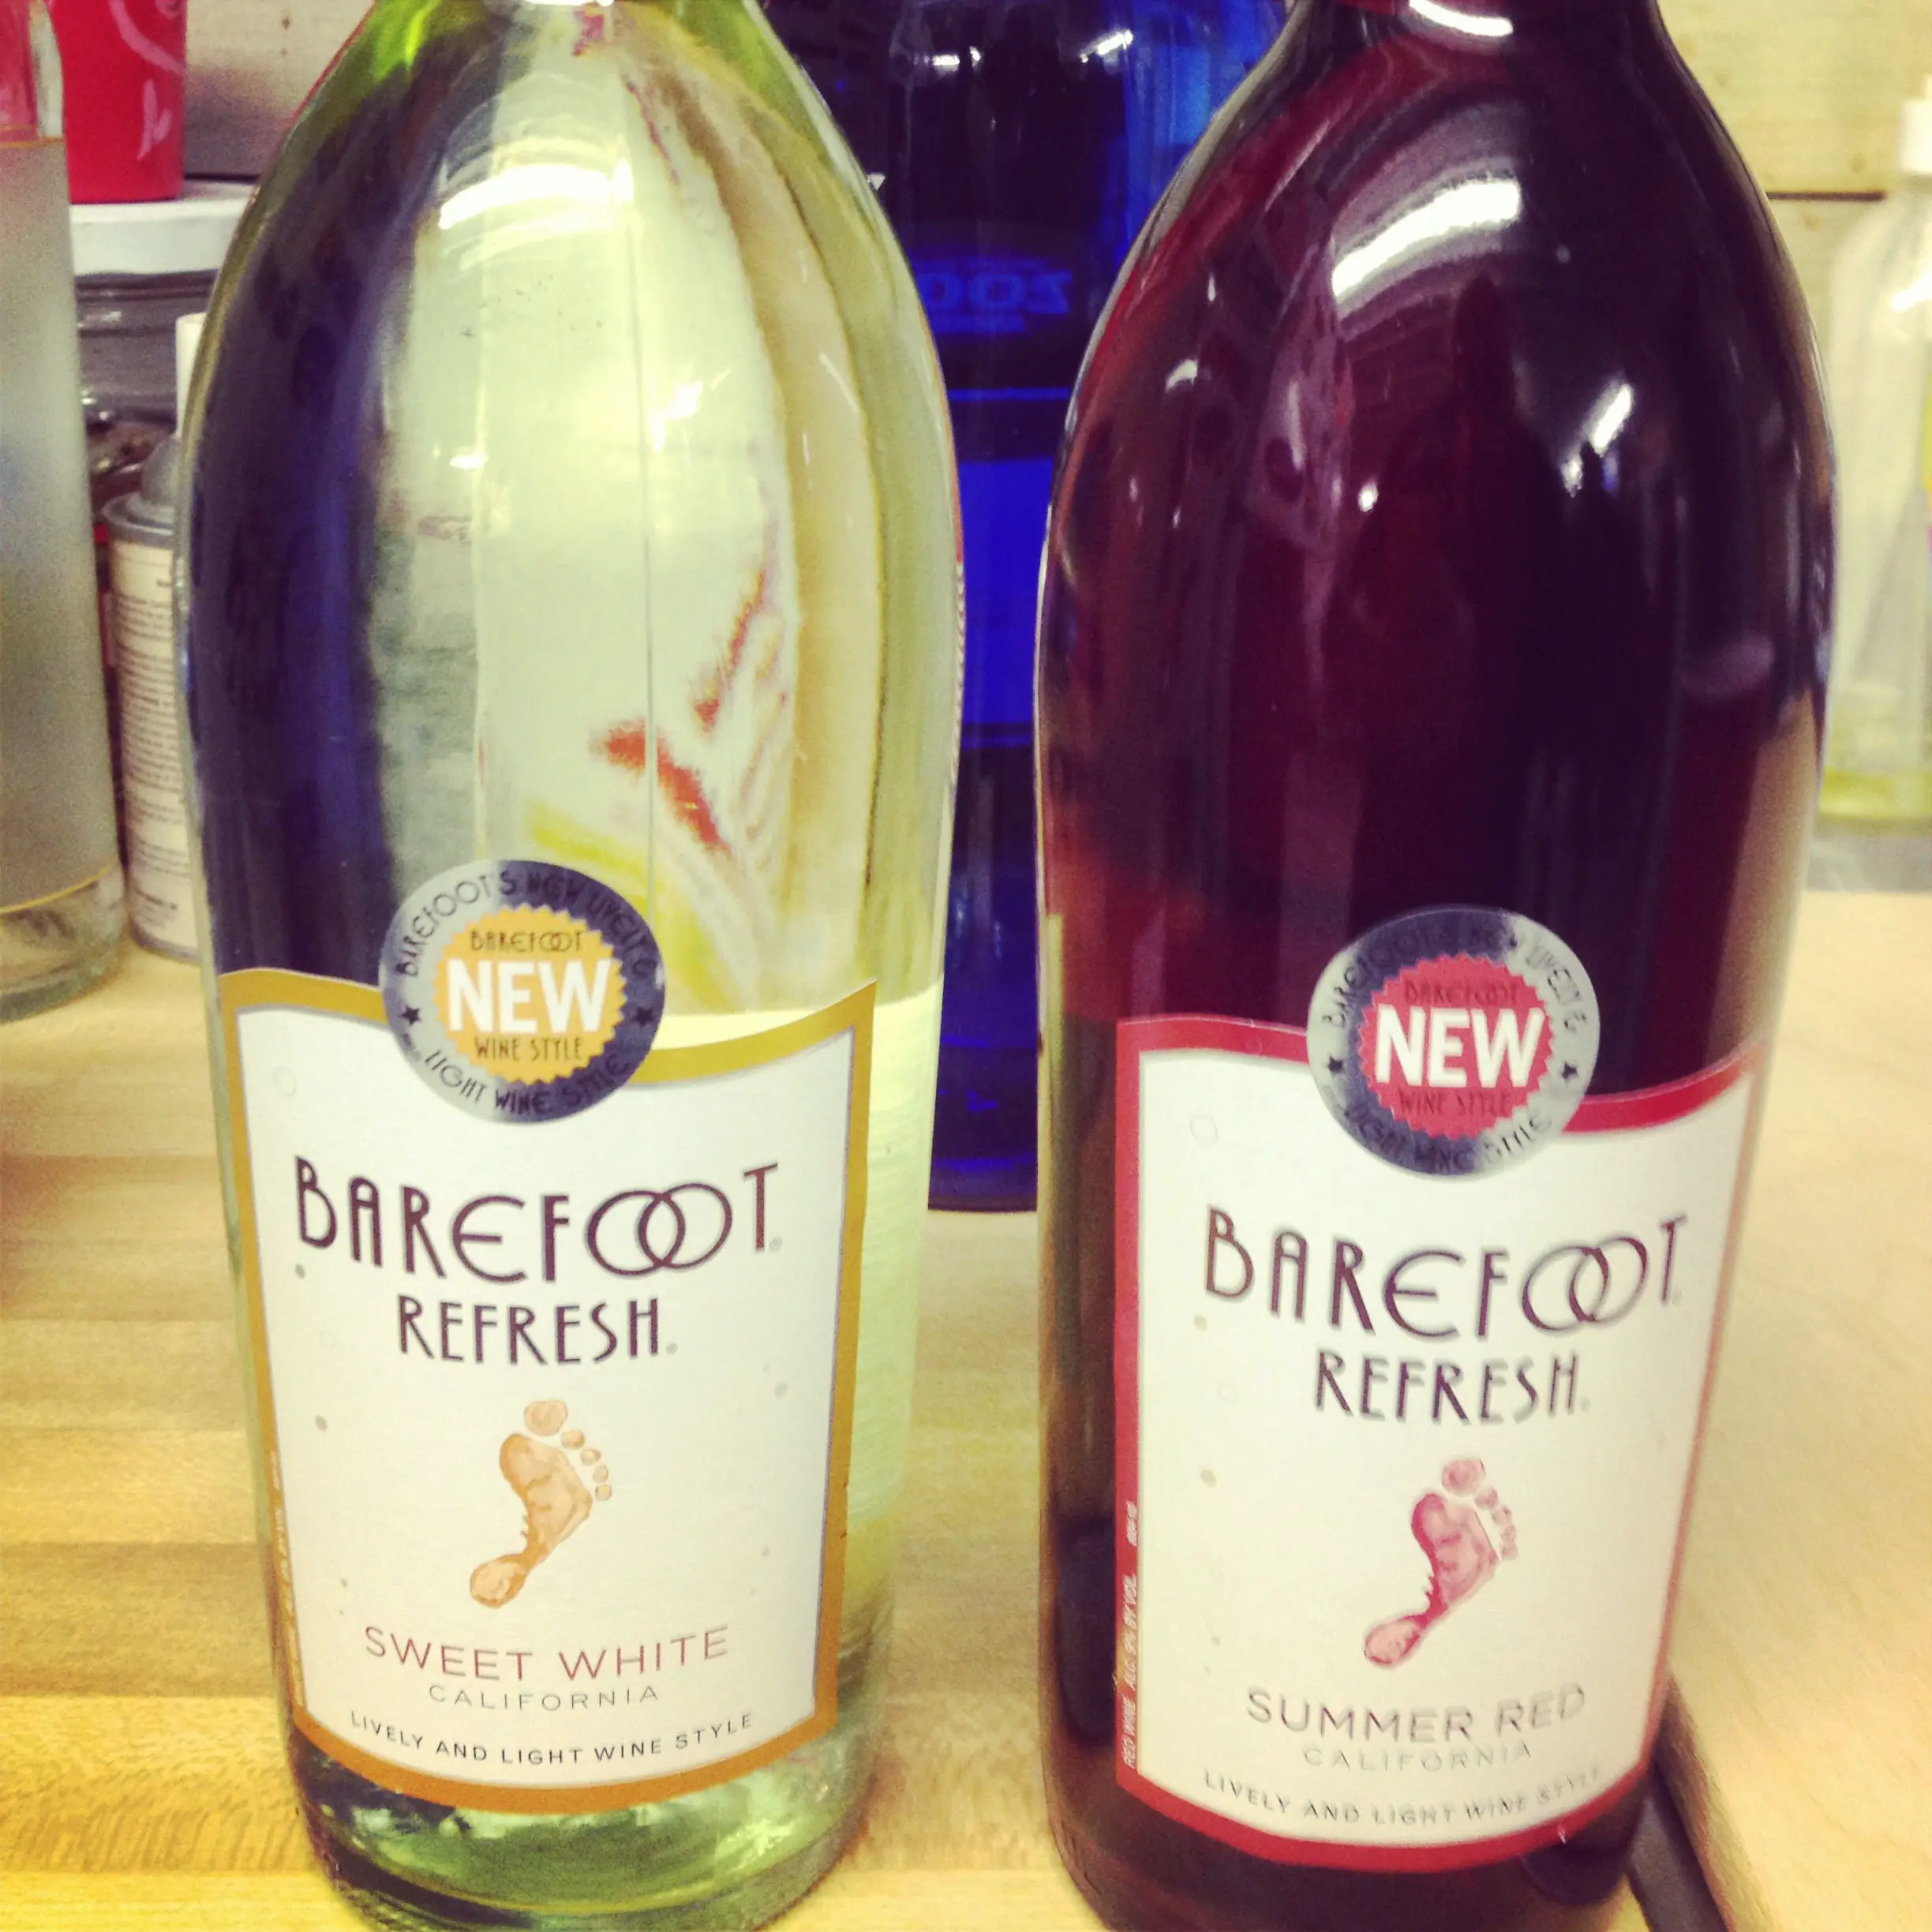 Both of these wines were fantastic!! The white wine tasted like 7Up ...